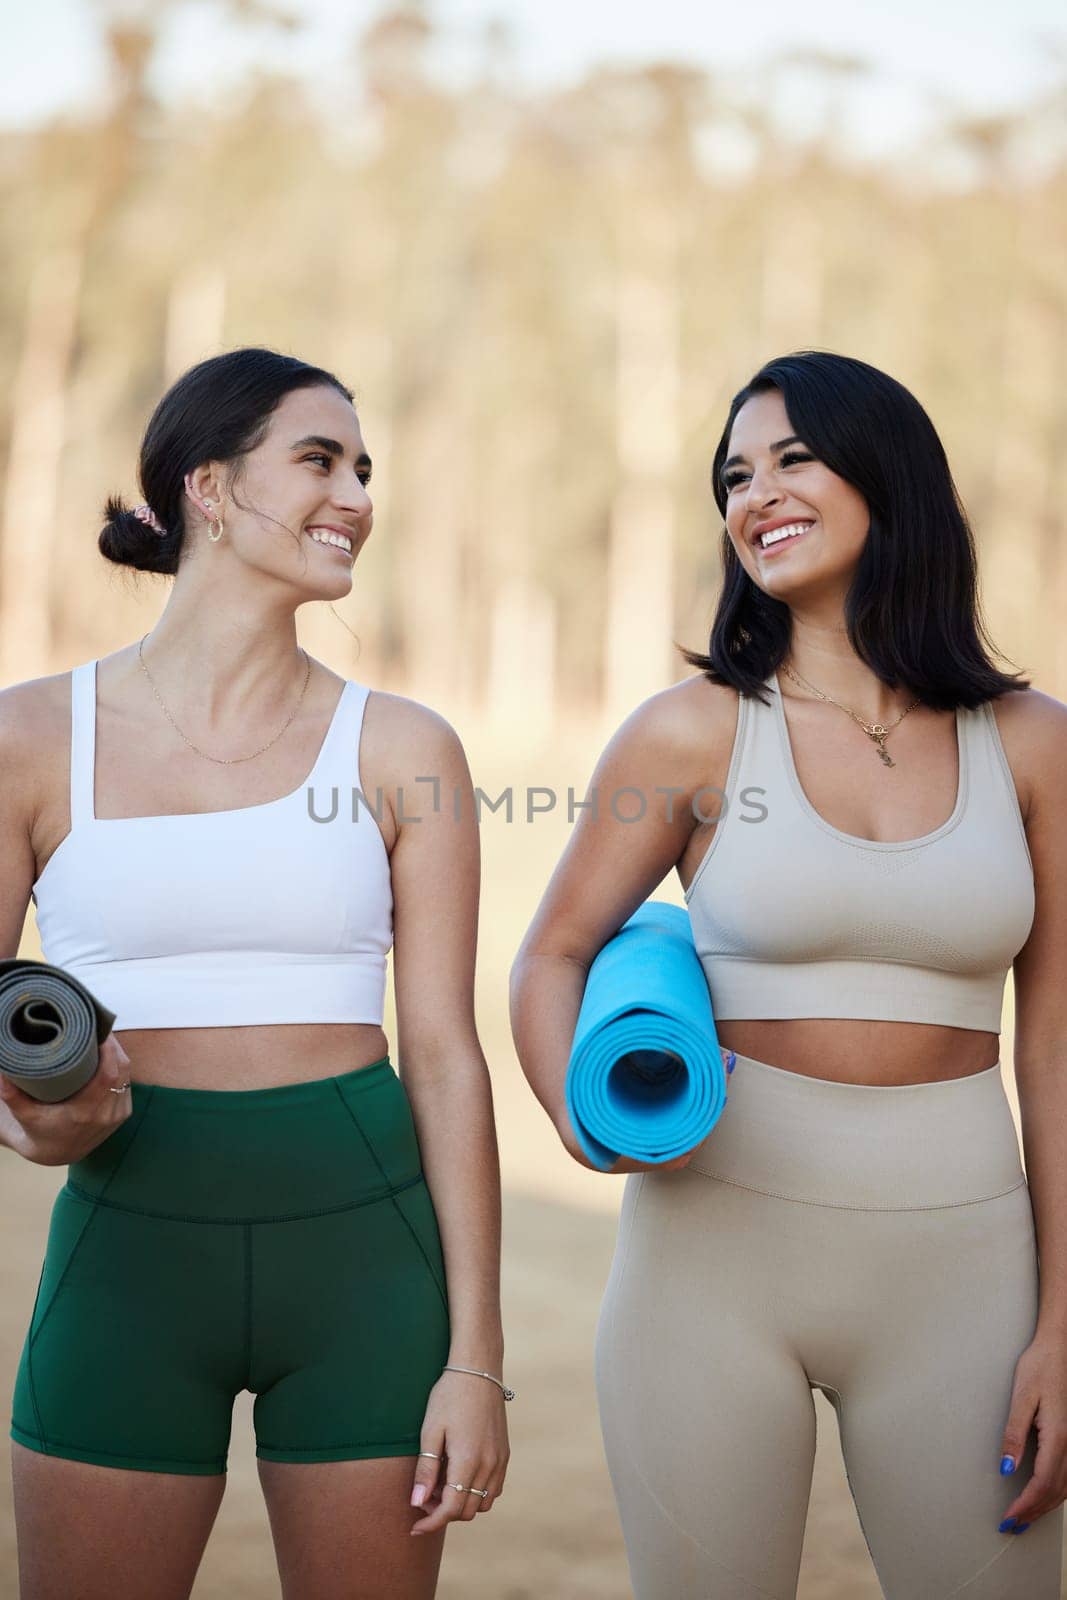 Fitness, start or friends in nature for yoga exercise workout or body training in healthy lifestyle. Athlete girls, women or fun people with happy smile ready for exercising together in summer on mat.